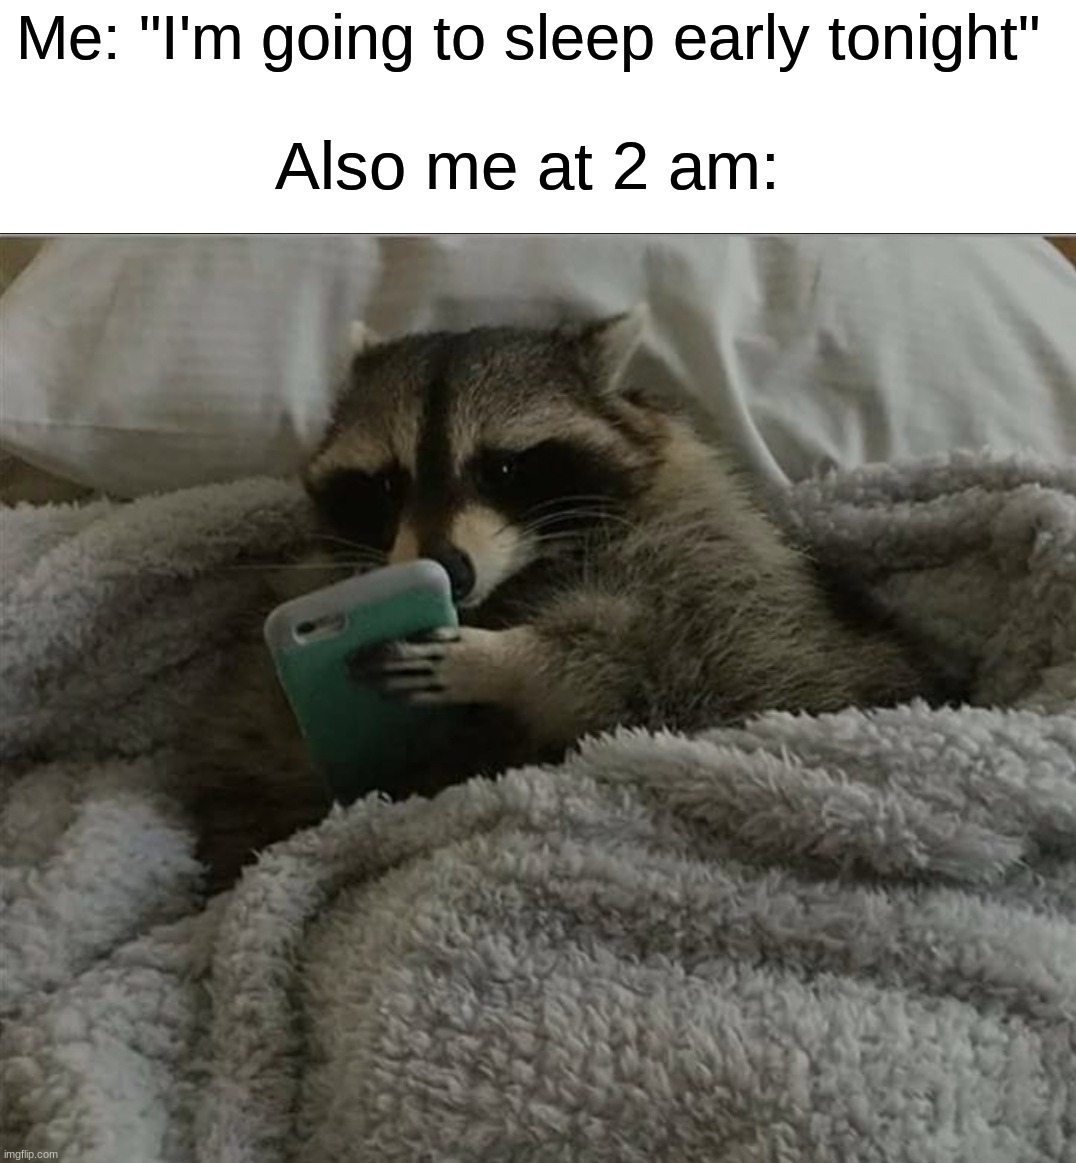 Like that's ever gonna happen | Me: "I'm going to sleep early tonight"; Also me at 2 am: | image tagged in raccoon in bed,memes,funny,true story,relatable memes,sleep | made w/ Imgflip meme maker